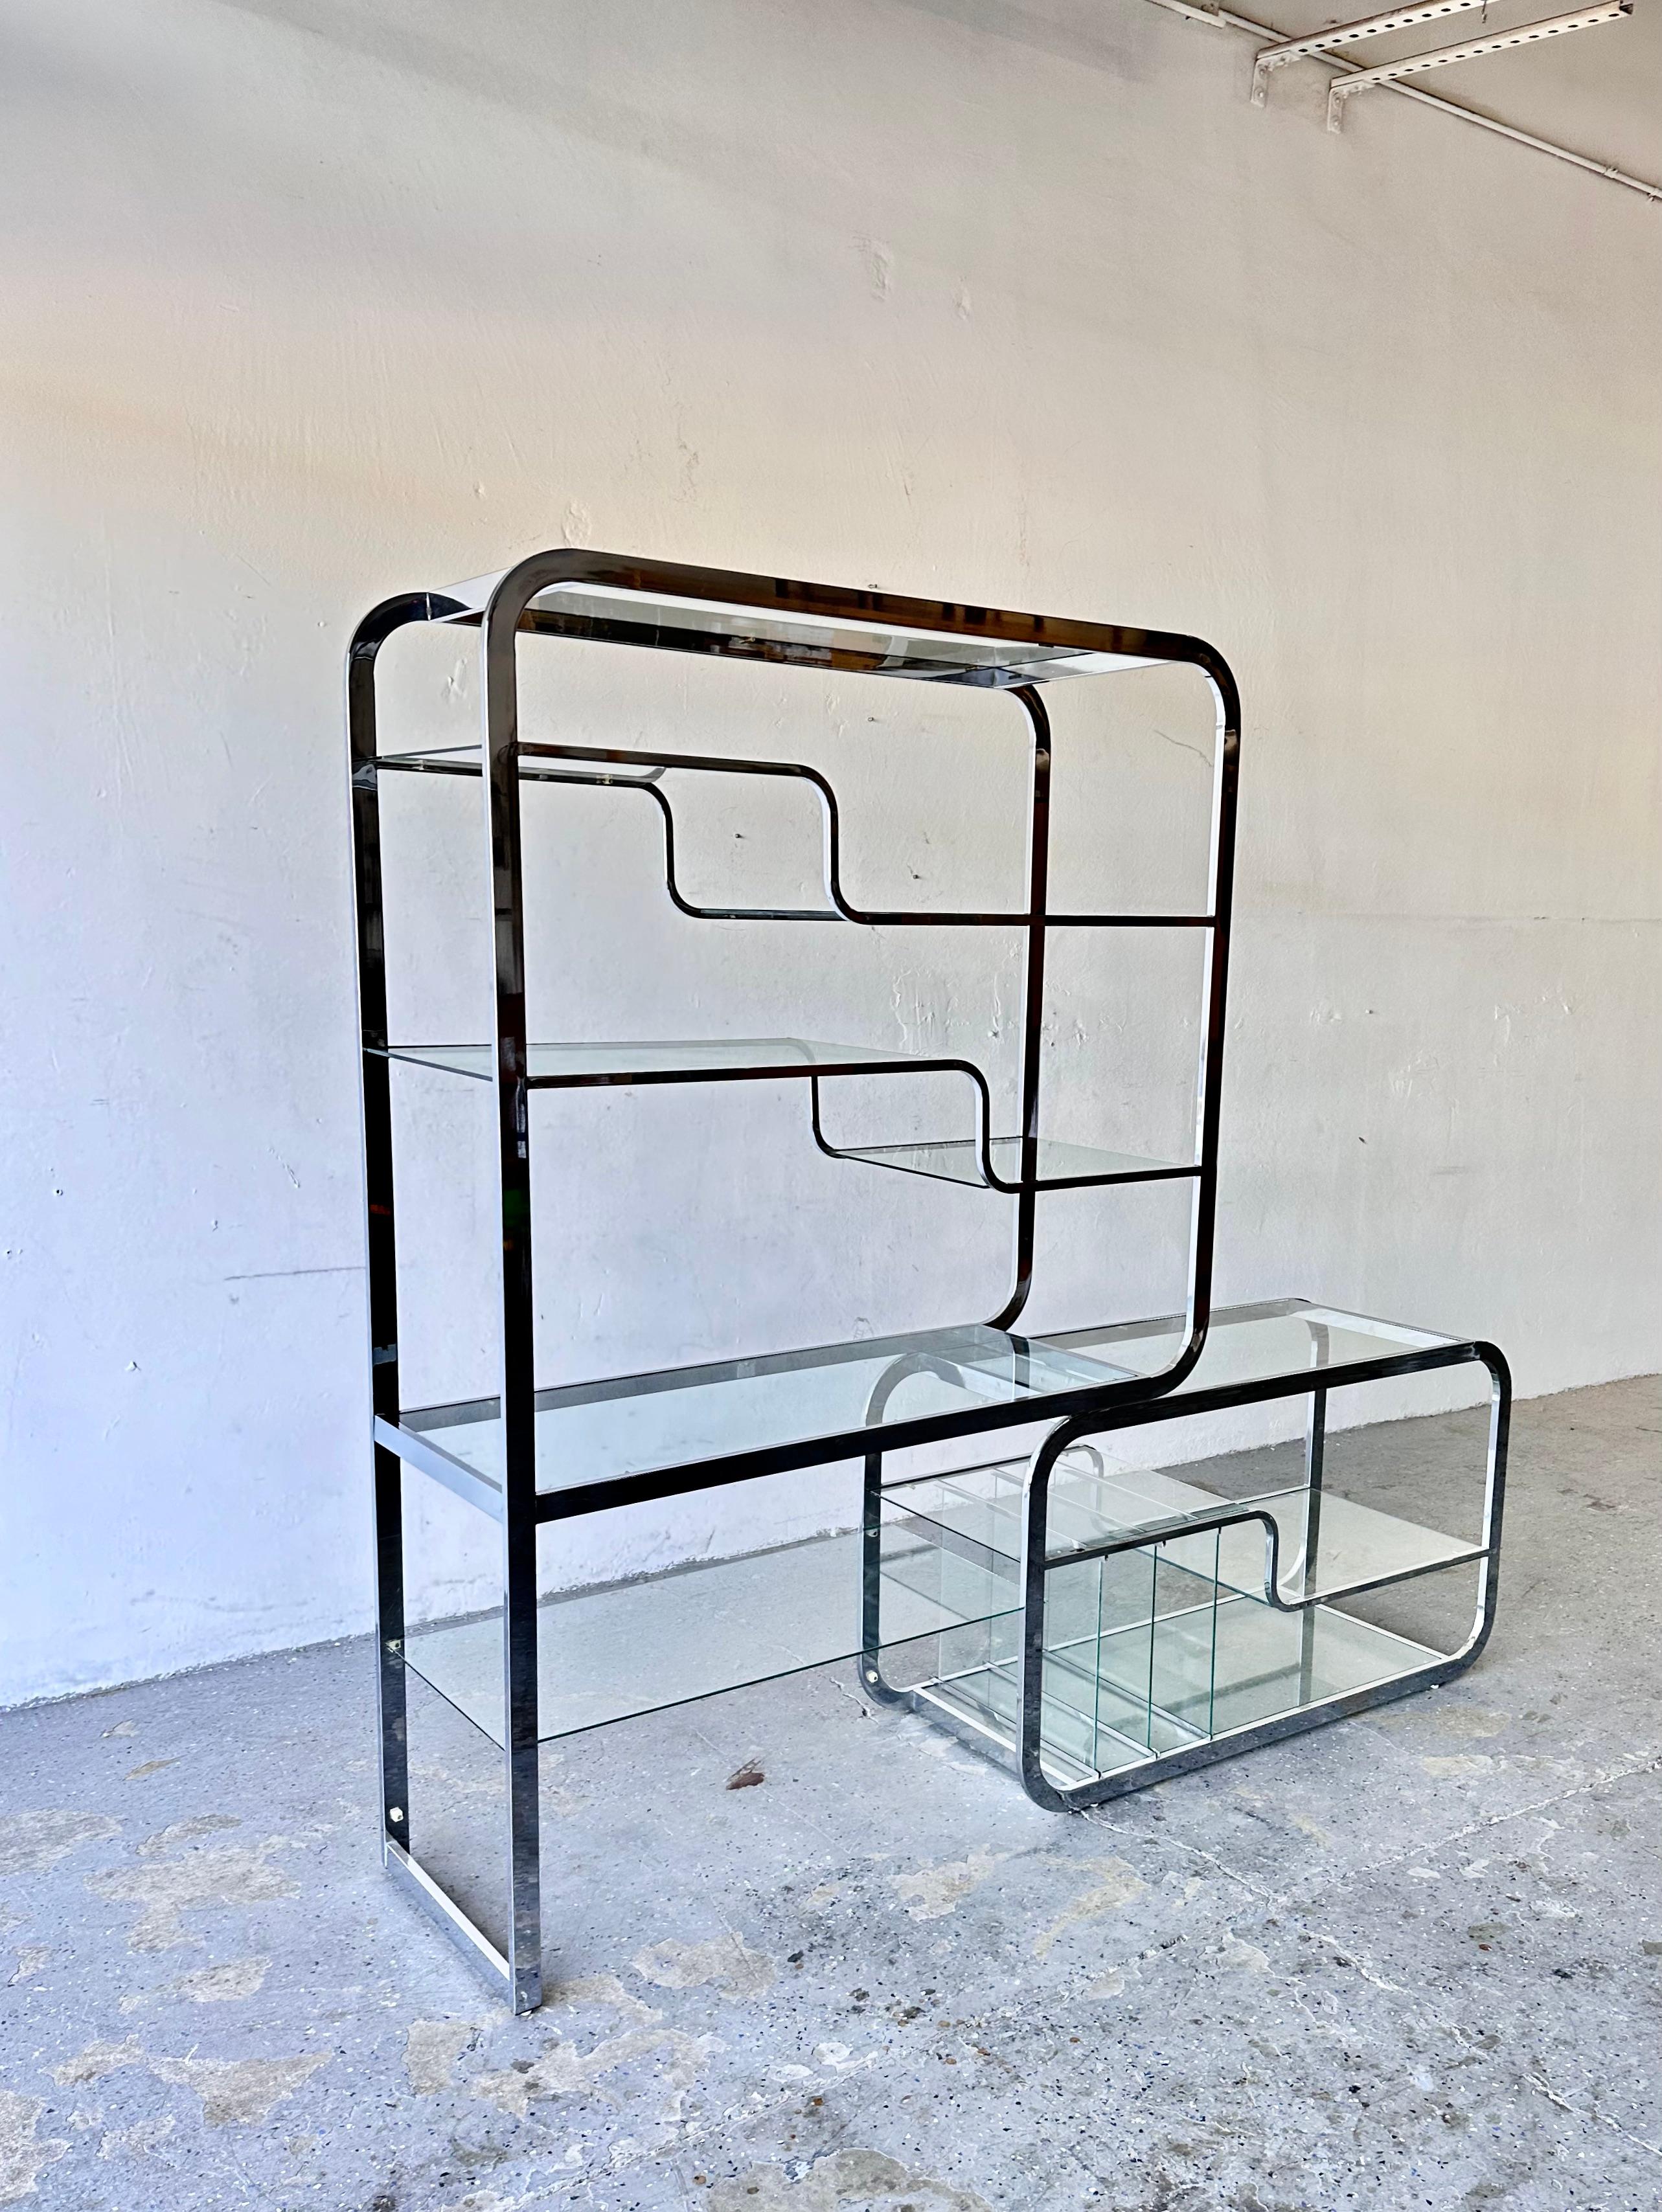 Design Institute Mid Century Chrome Cantilever Etagere Room Divider Display Shelf in the style of  Milo Baughman 

This piece is often attributed to Milo Baughman but it is not. It is by Design Institute. This magnificent Mid Century /Post-Modern